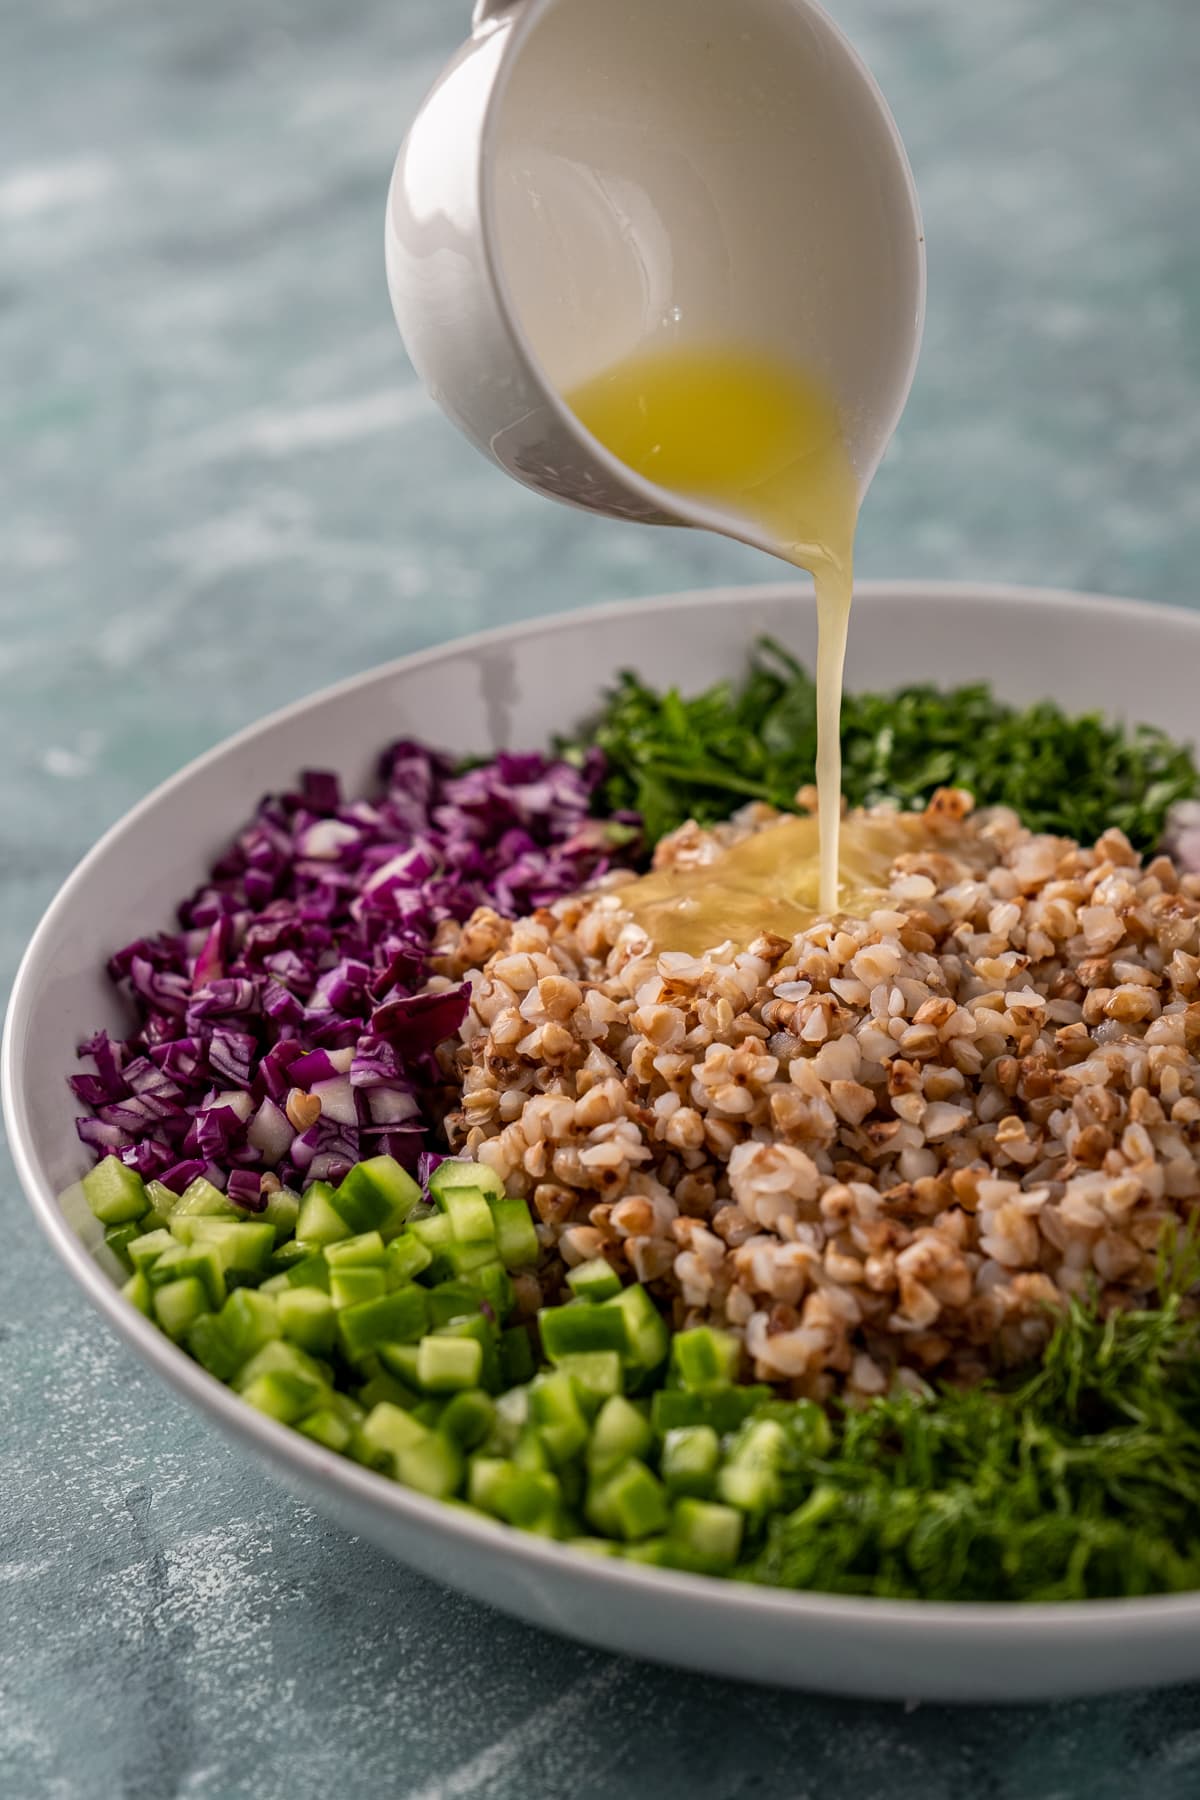 Pouring lemon dressing in a white sauce bowl over the buckwheat salad.